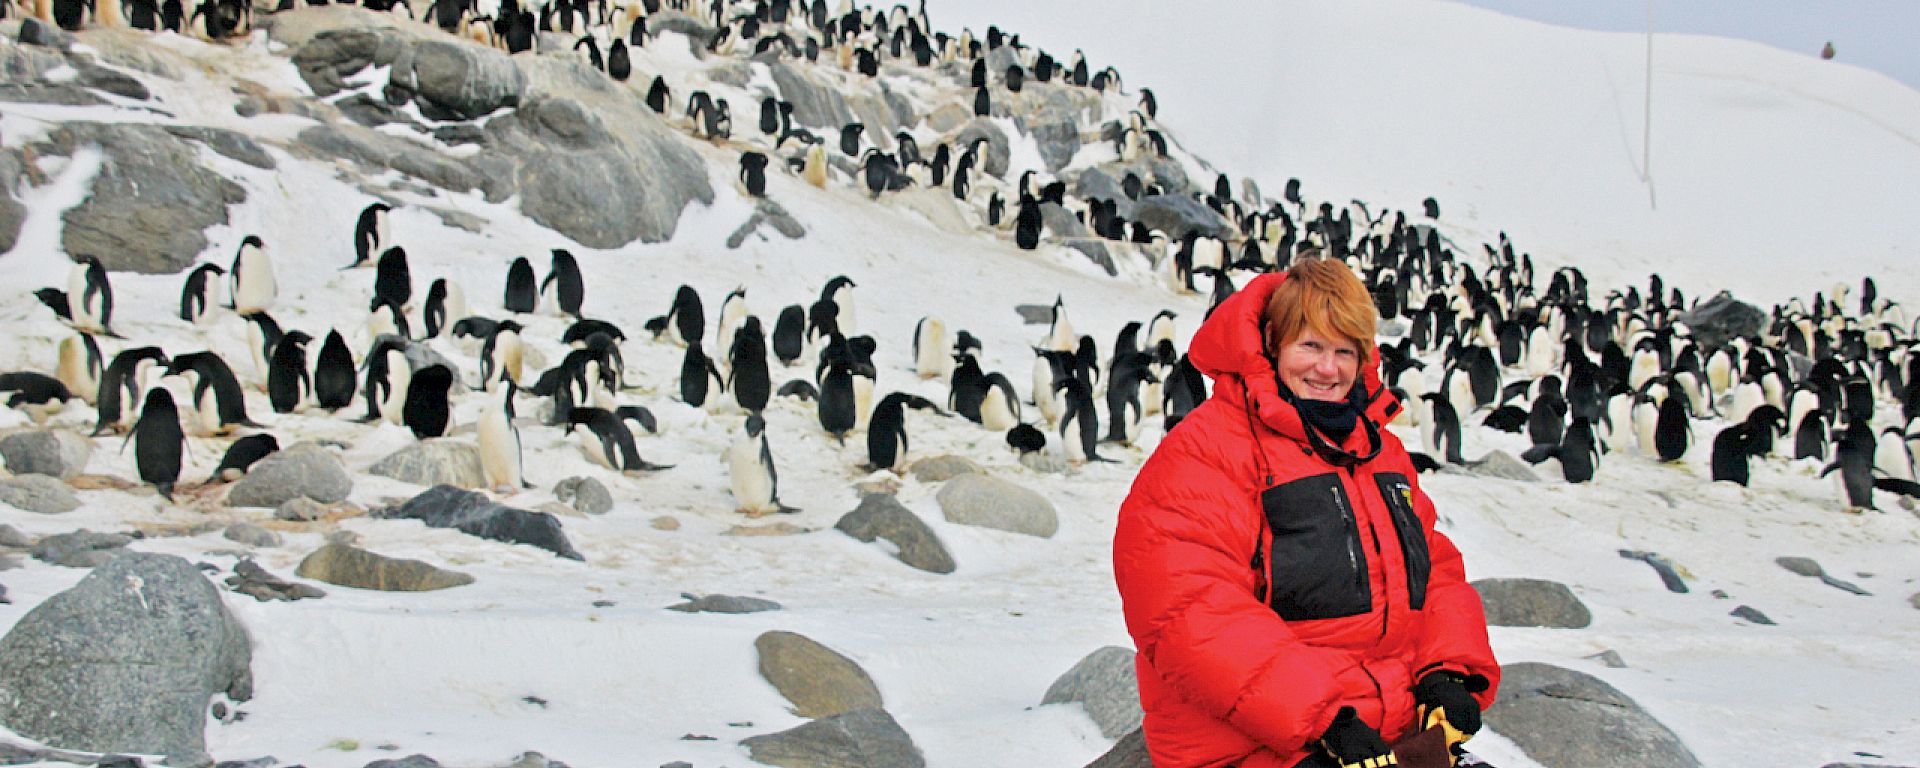 Artist sitting on rocks with Adelie penguins in background